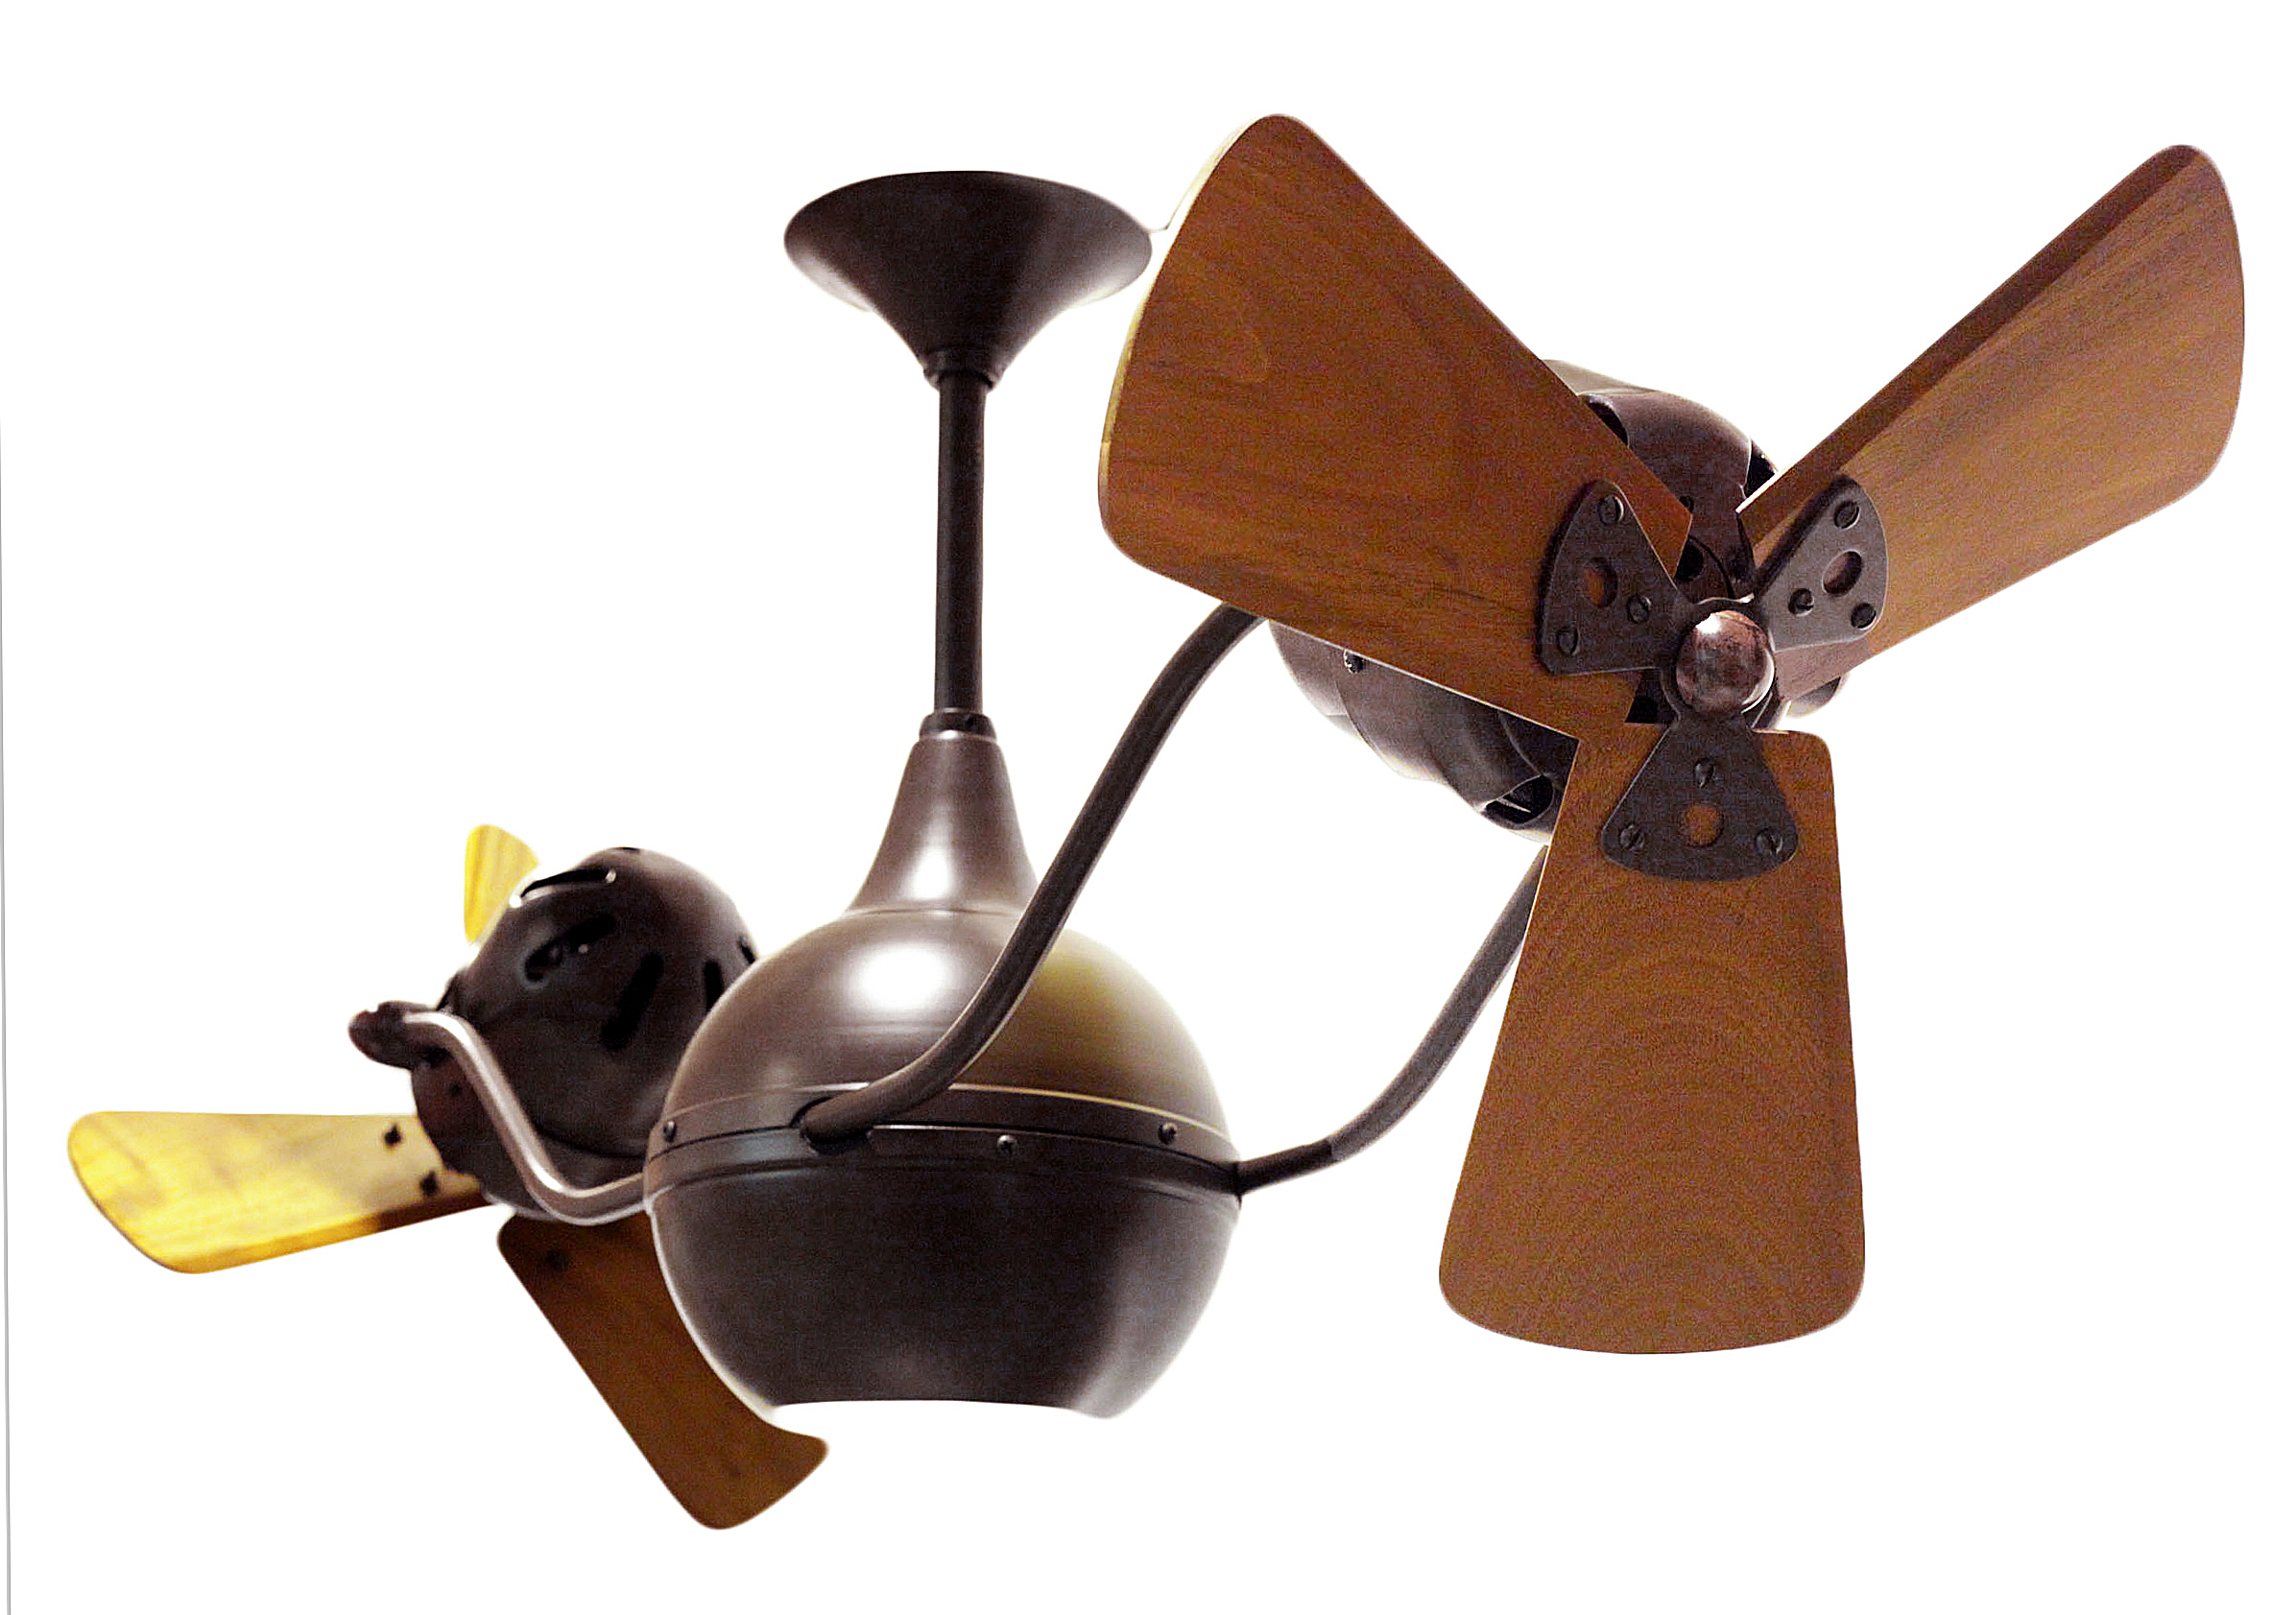 Vent-Bettina Rotational Dual Head Ceiling Fan in Bronzette Finish with Mahogany Wood Blades